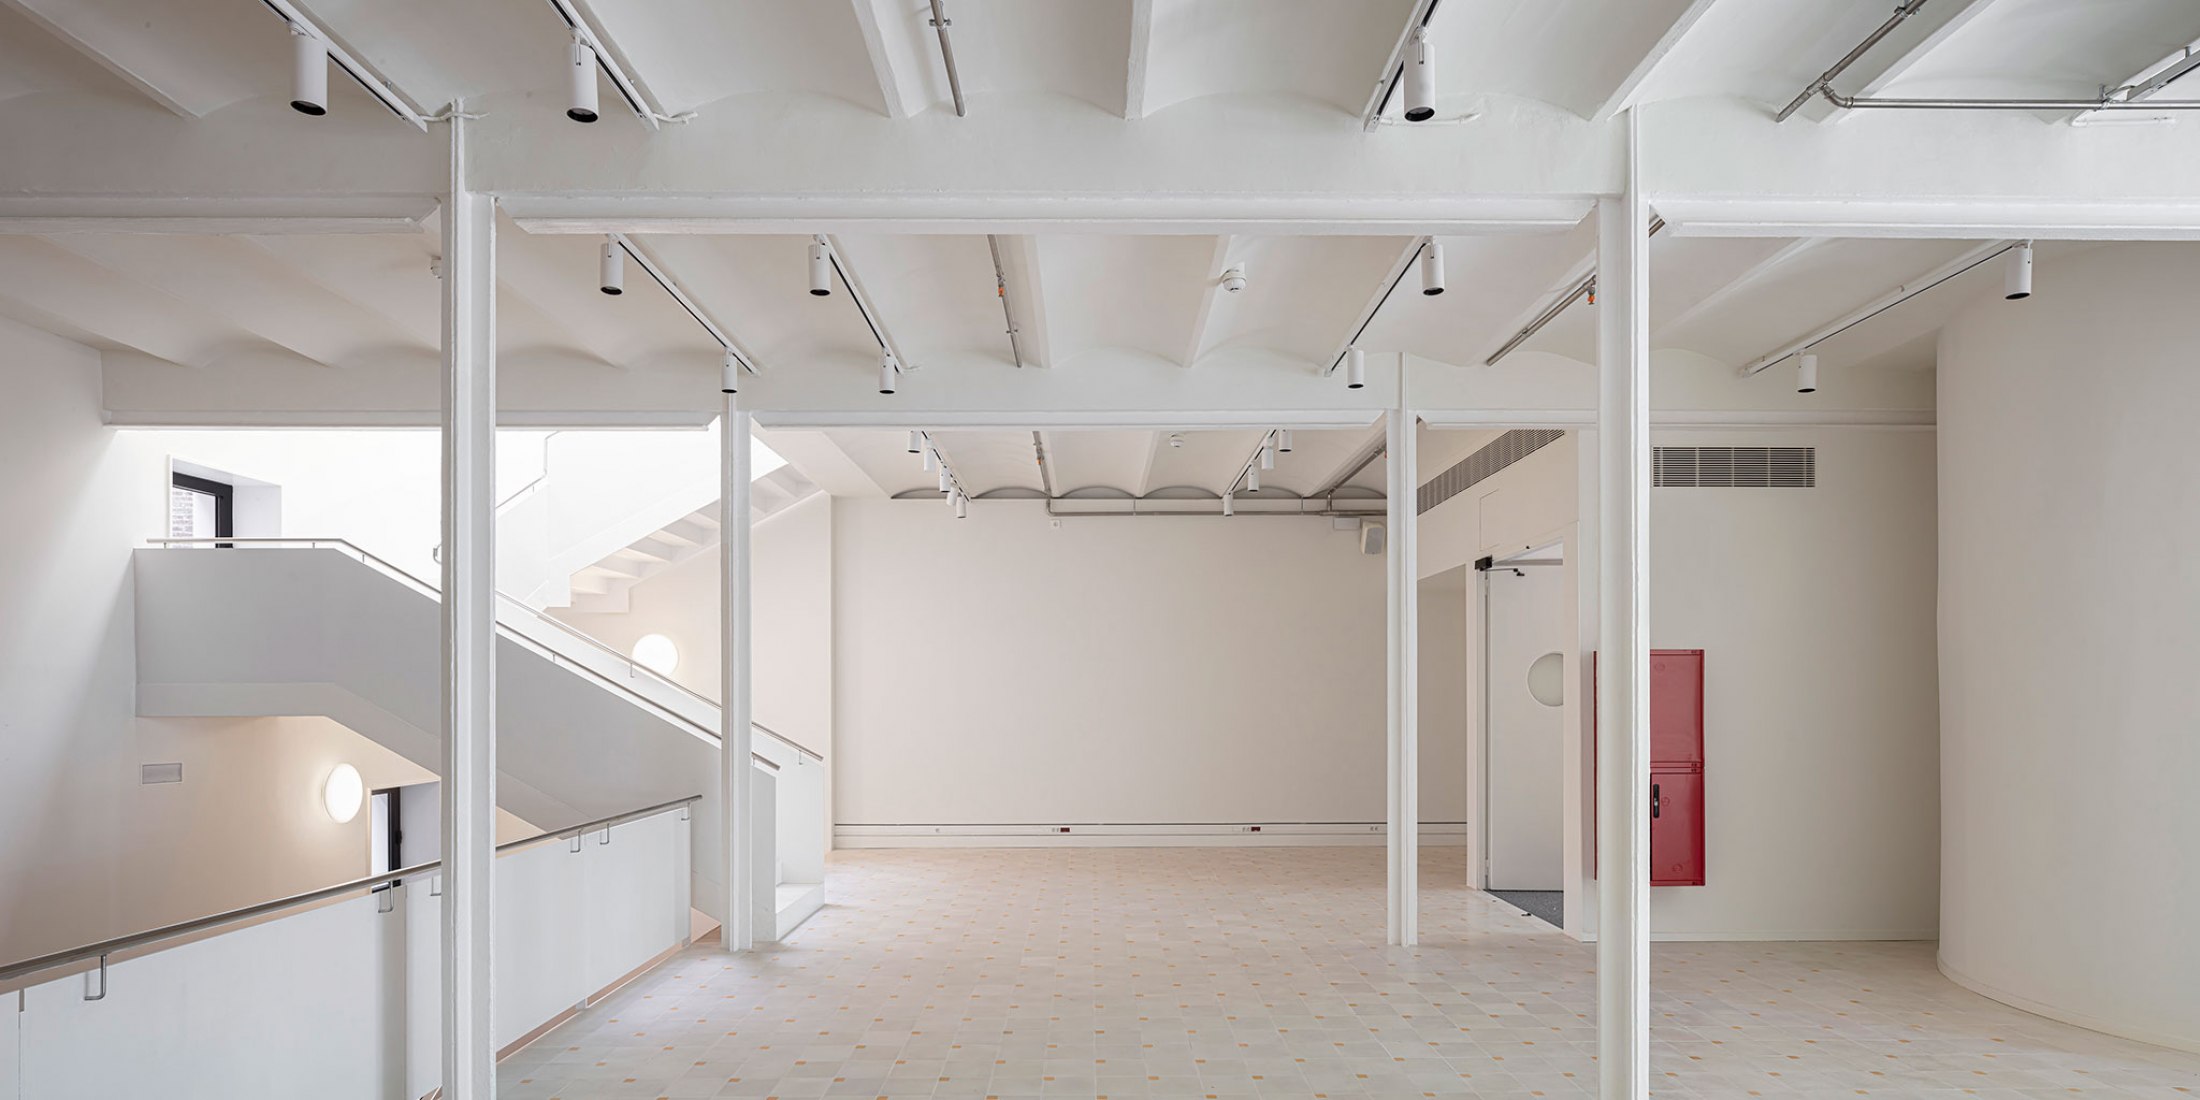 Renovation of the Gavà Cooperators Union by Meritxell Inaraja. Photograph by Adrià Goula.